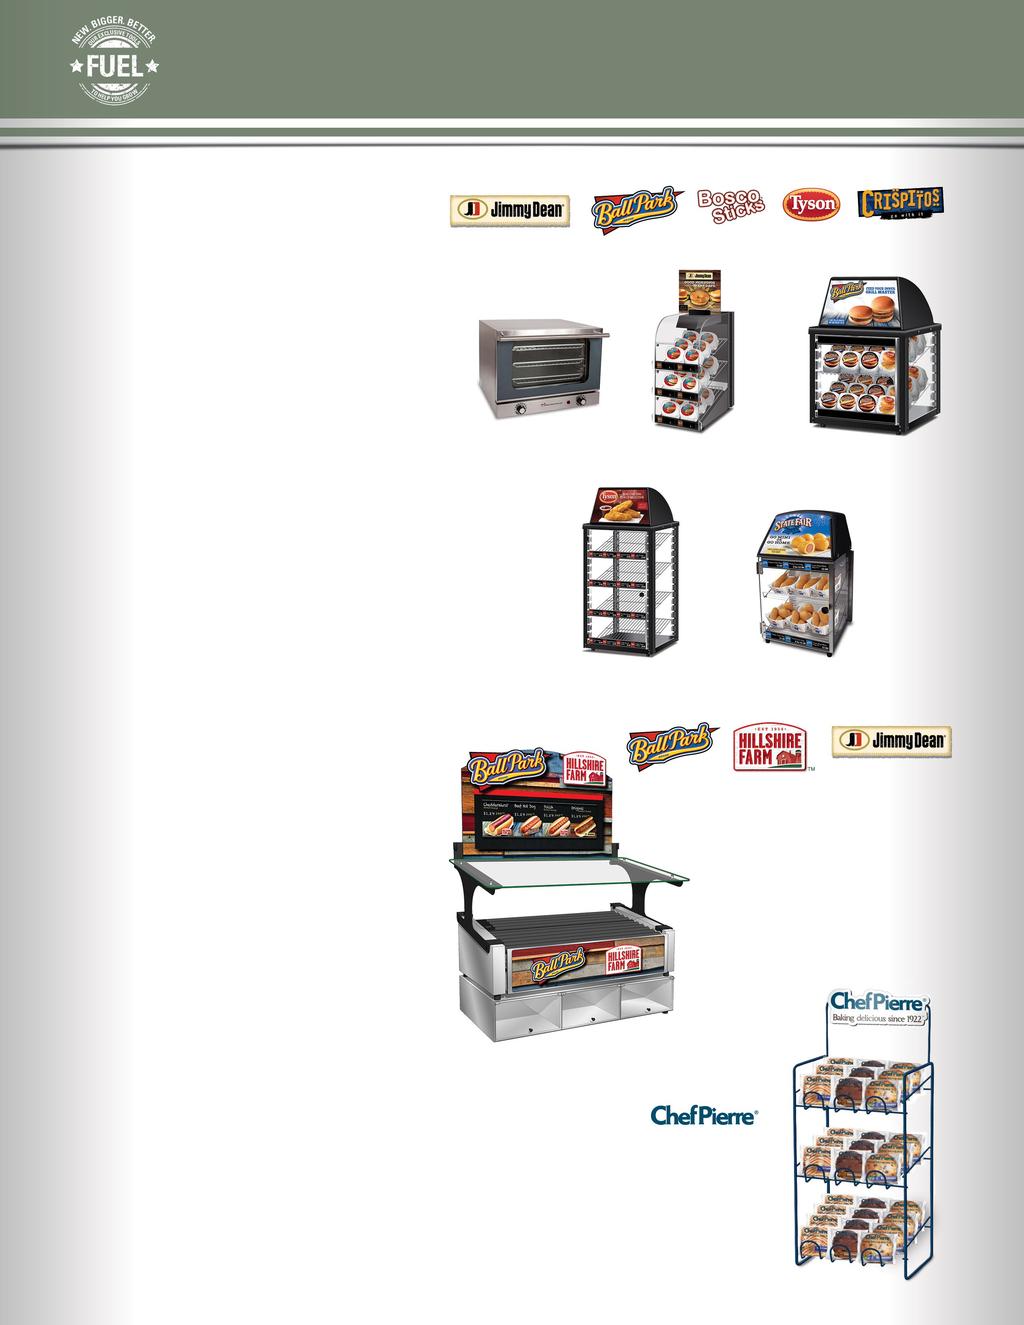 SO MANY OPTIONS. SO MANY OPPORTUNITIES. WARMER REBATE Now with Convection Oven Support for New Food Offerings!